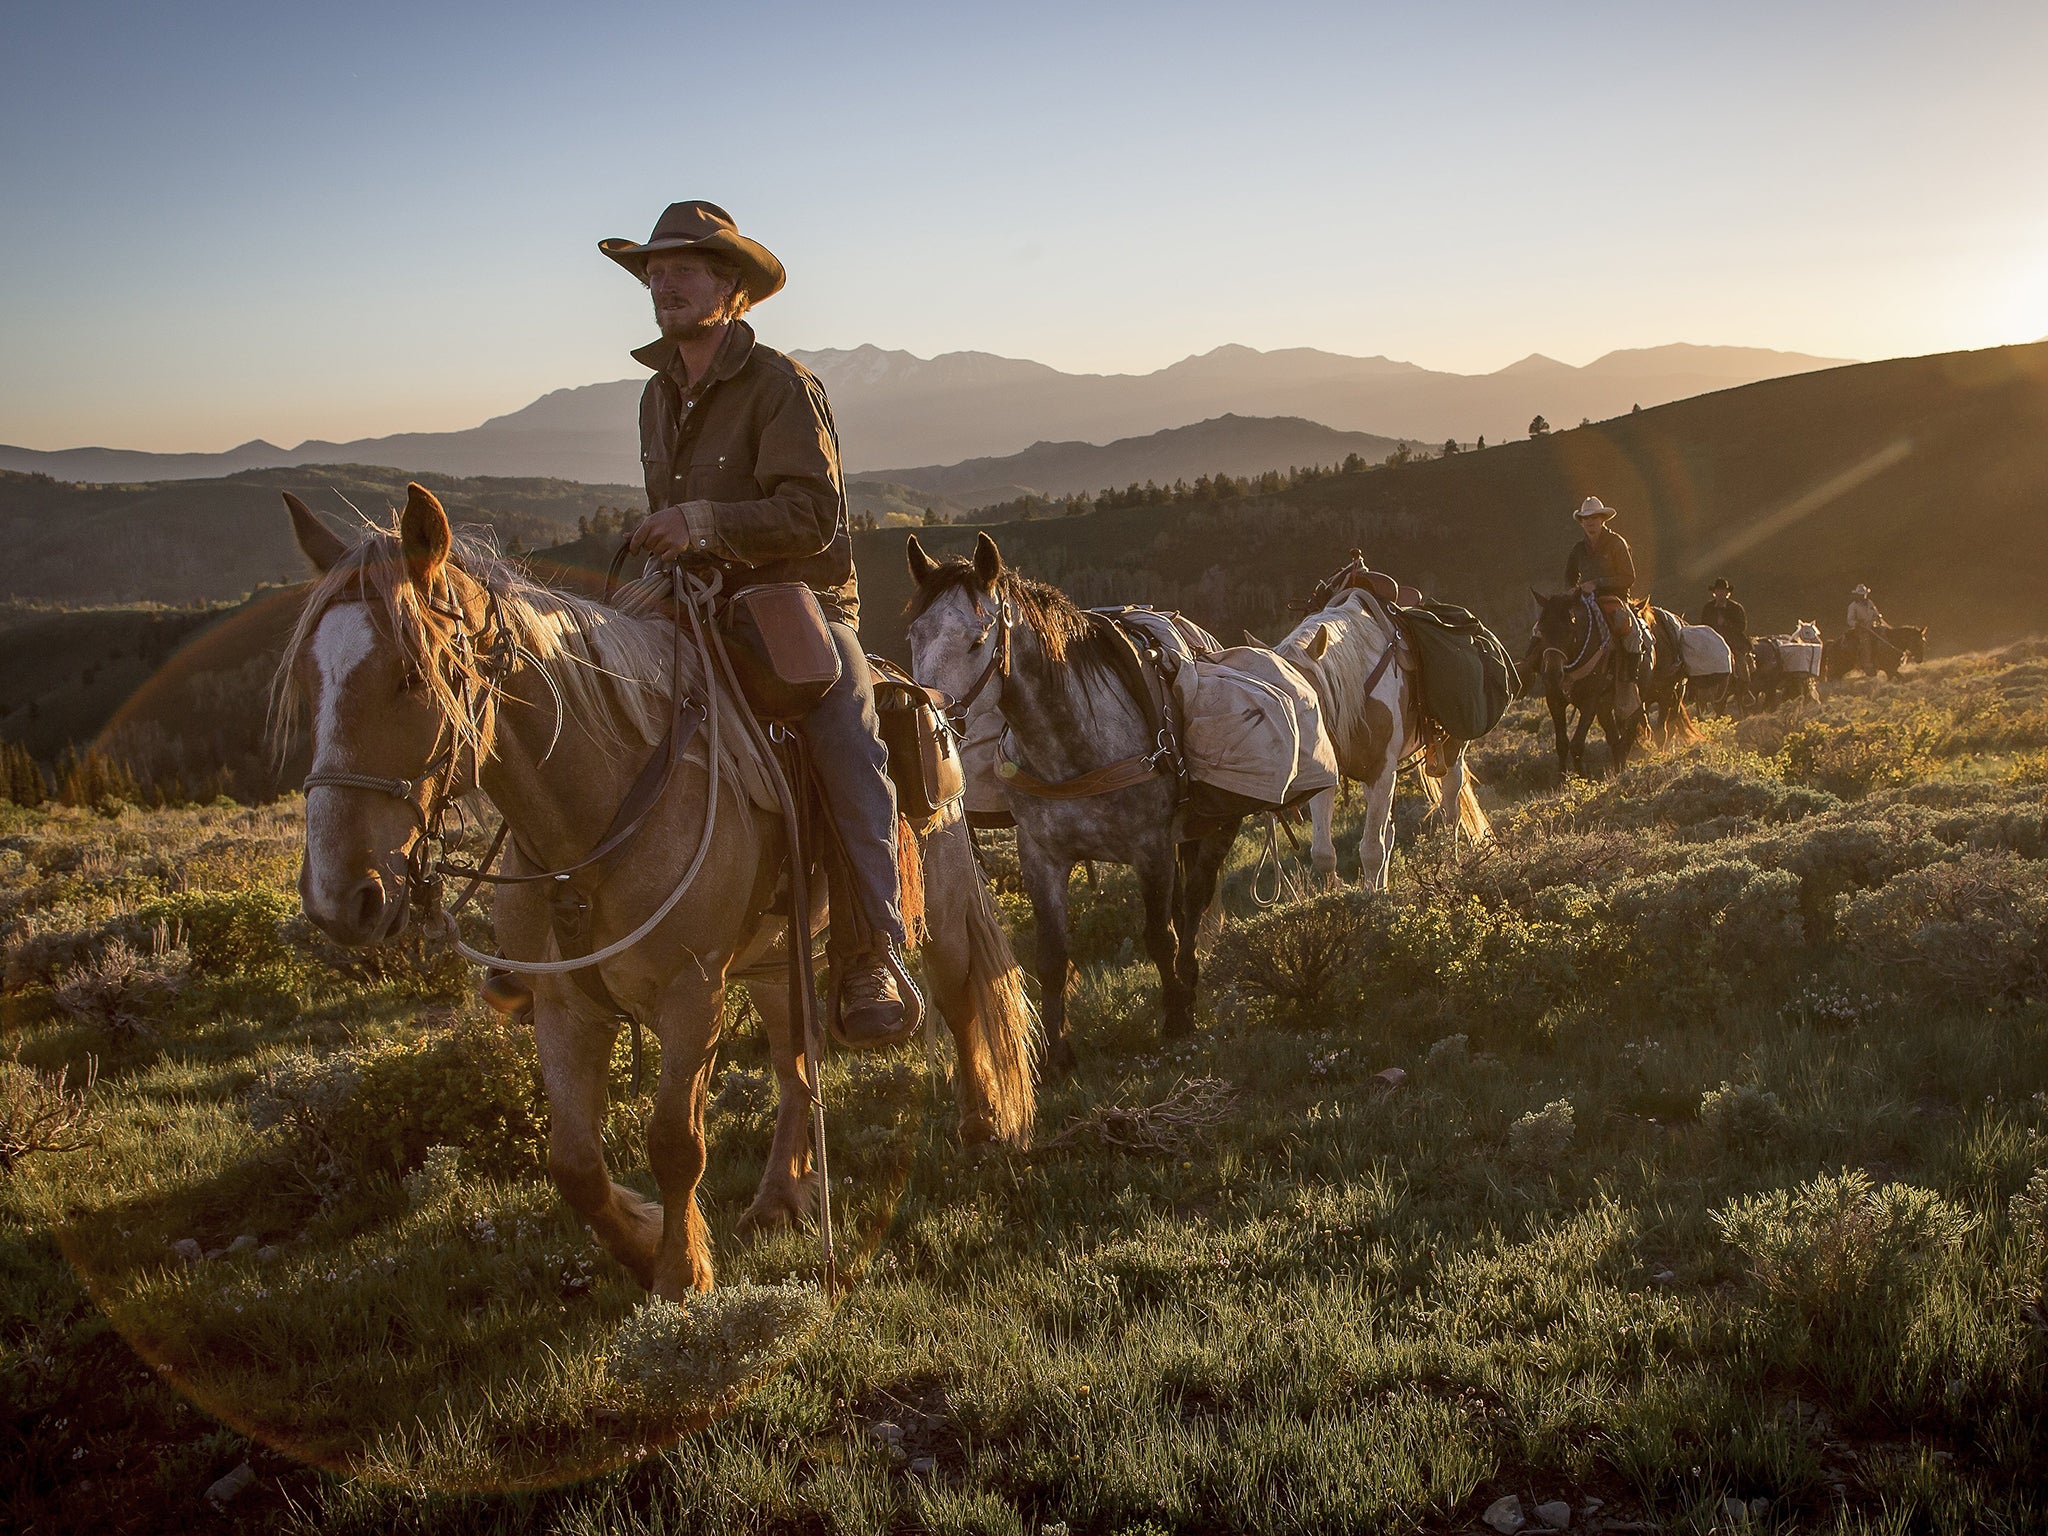 'Unbranded' follows four young cowboys taking mustangs on an epic journey through the rugged West